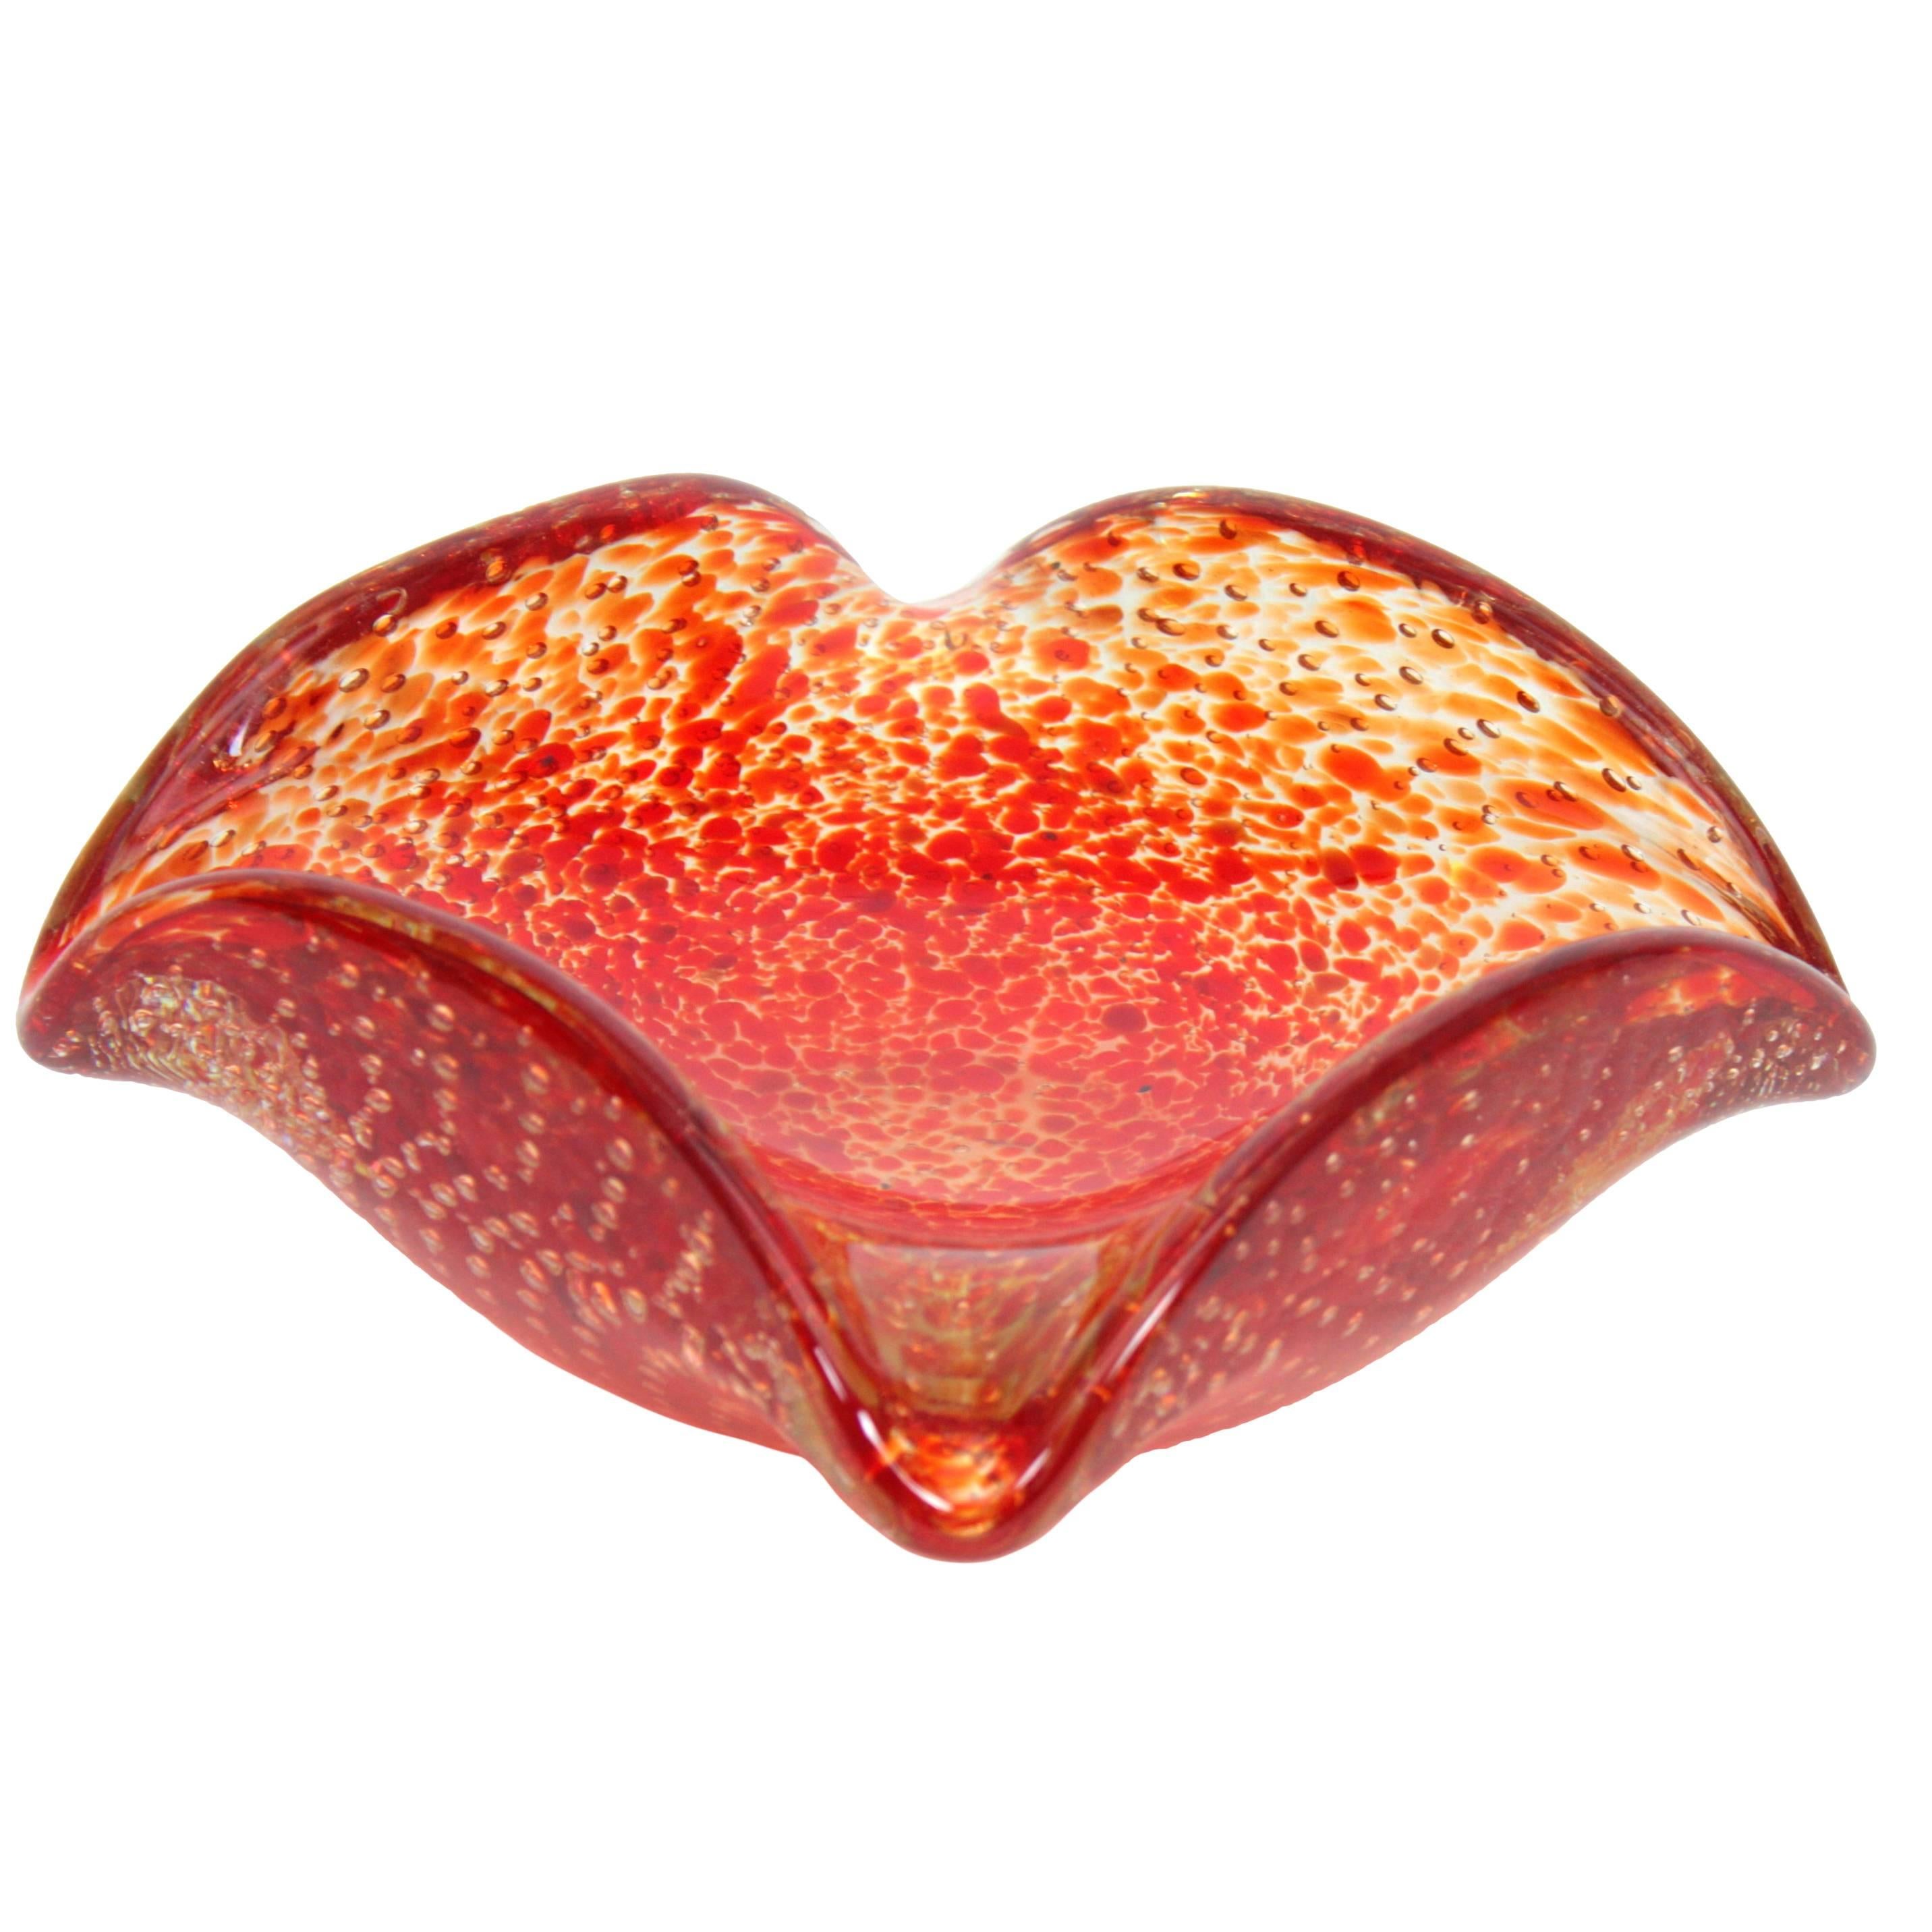 Huge Controlled Bubbles Red and Orange Murano Glass Bowl